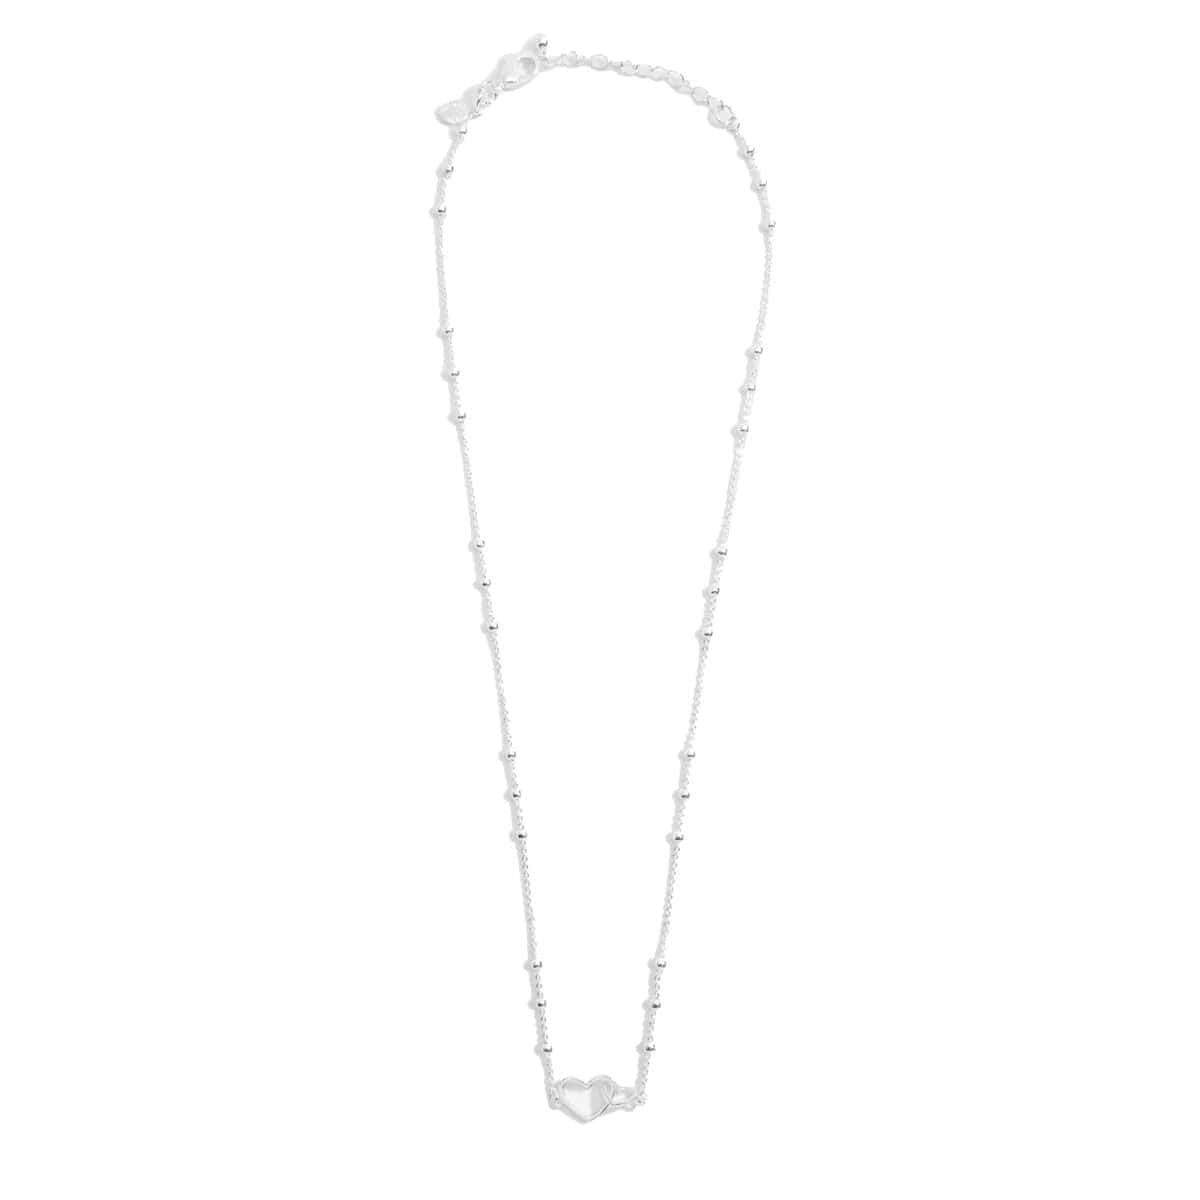 Joma Jewellery Necklace Joma Jewellery Forever Yours Necklace - Marvellous Mum